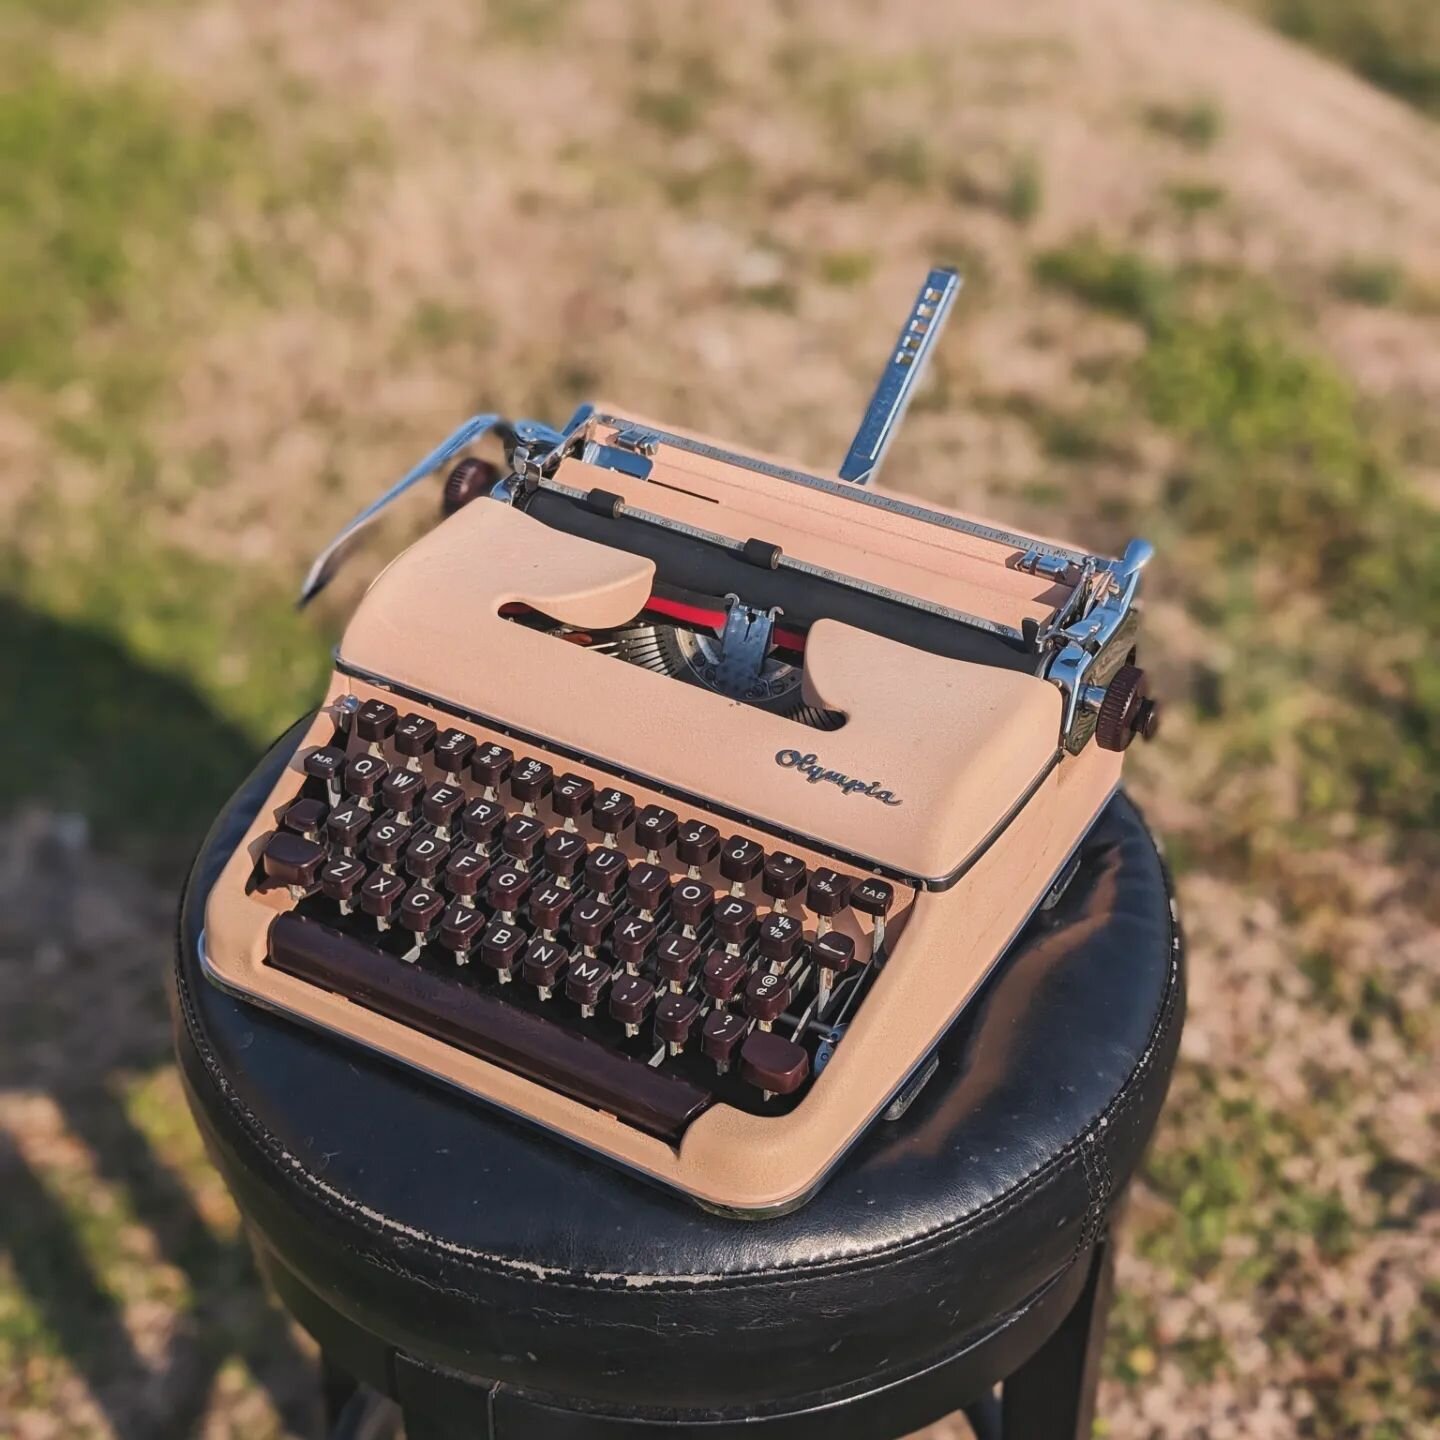 Finally!
New writing iron listed on nashvilletypewriter.com and in-store for sale.
There's a bunch more coming, still trying to learn how to balance the whole, you know-
Being an adult and staying on top of shit. Ha.

The tagging function hasn't been